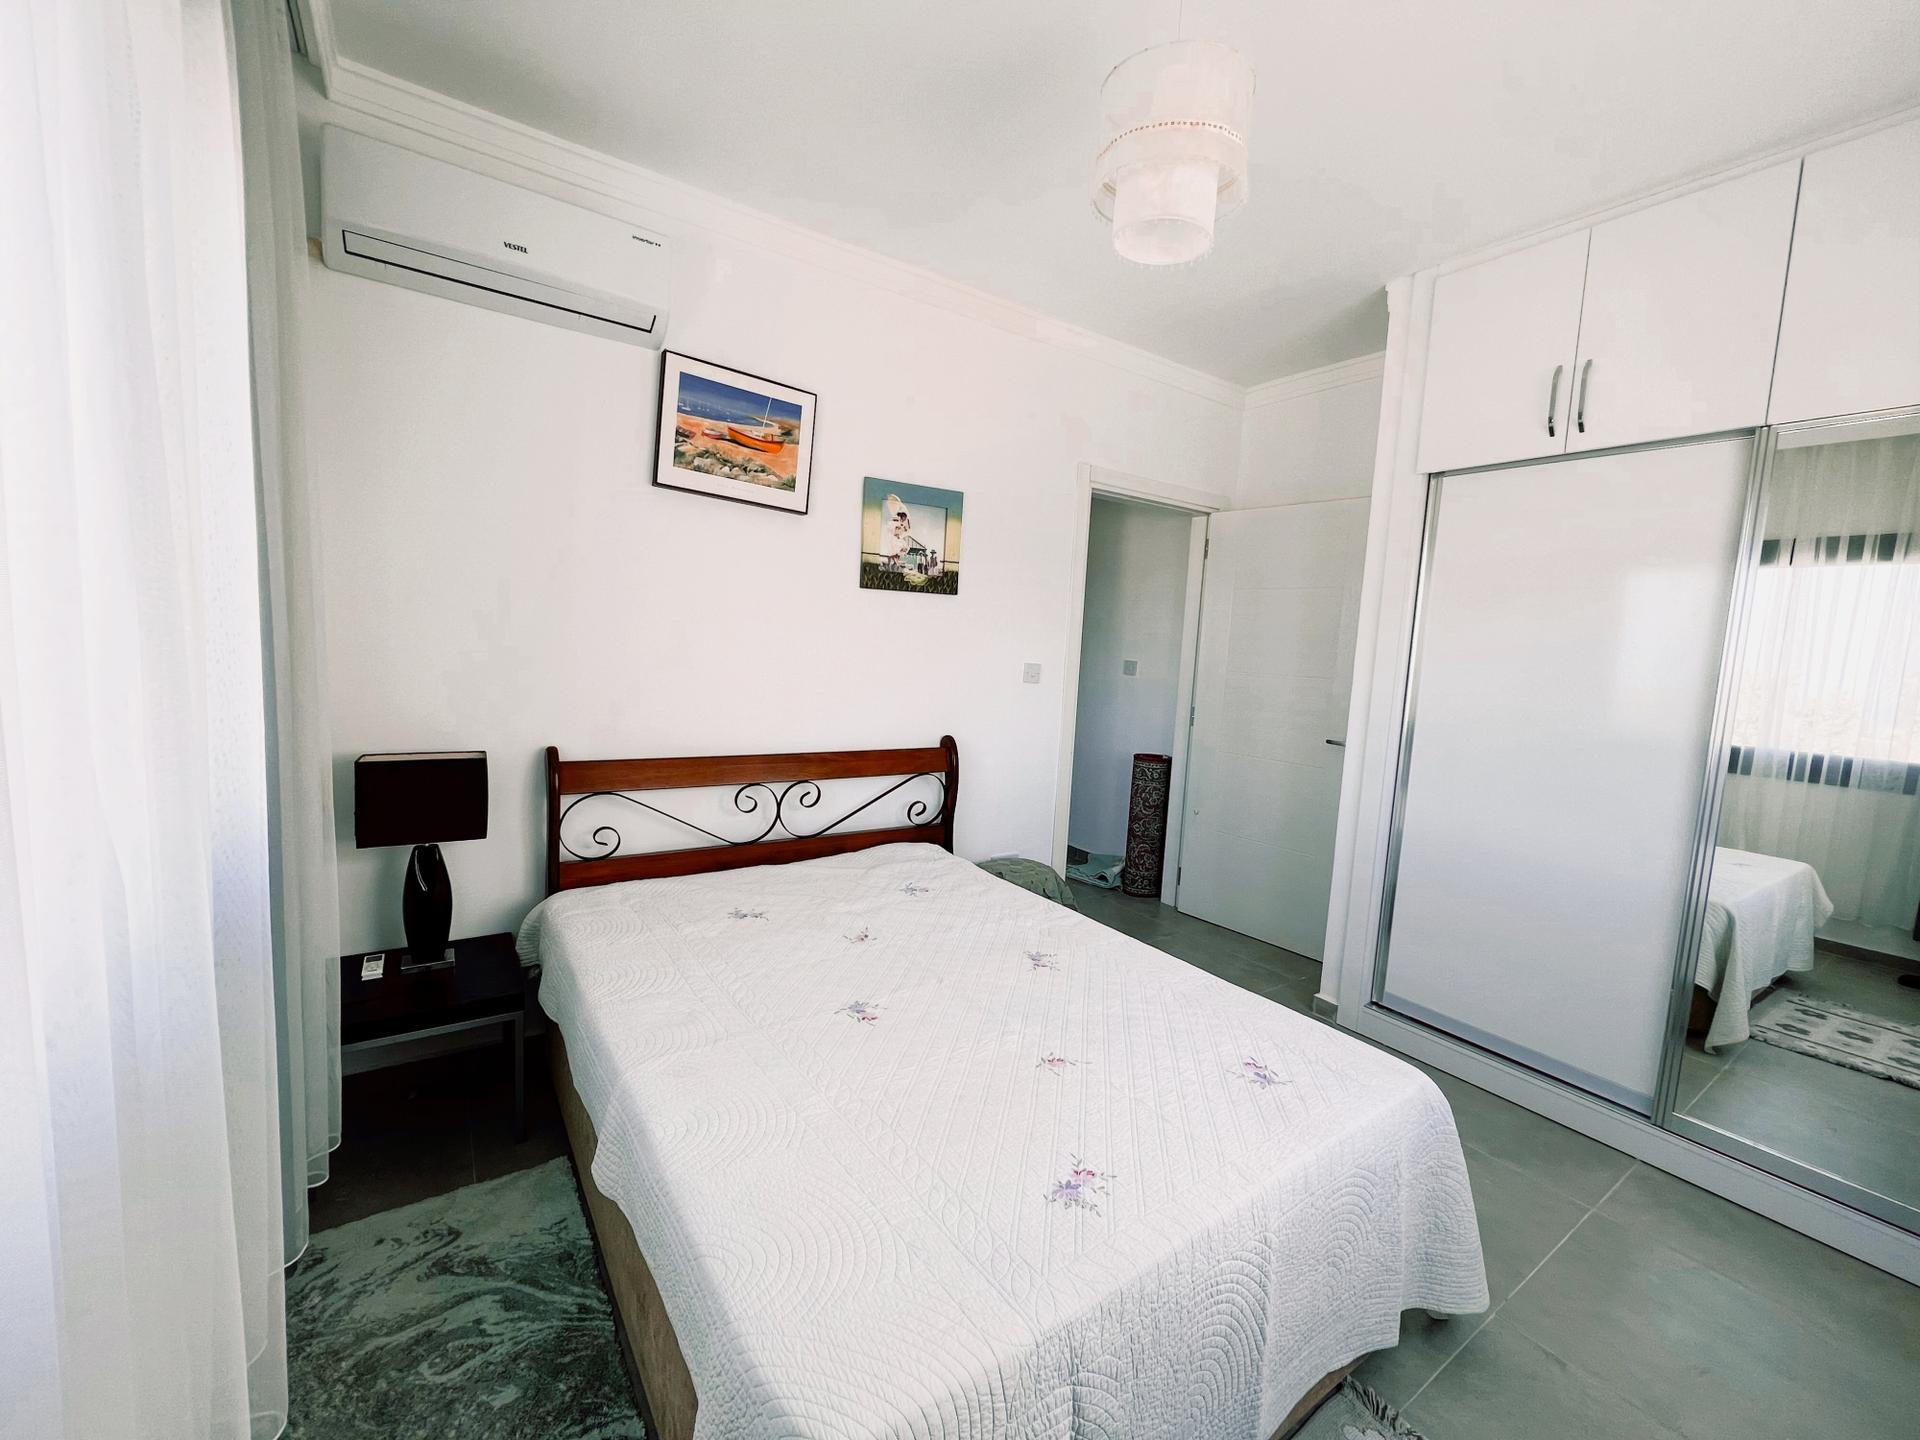 A sleeping sanctuary dominated by white with its AC, large wardrobe and comfortable double bed.